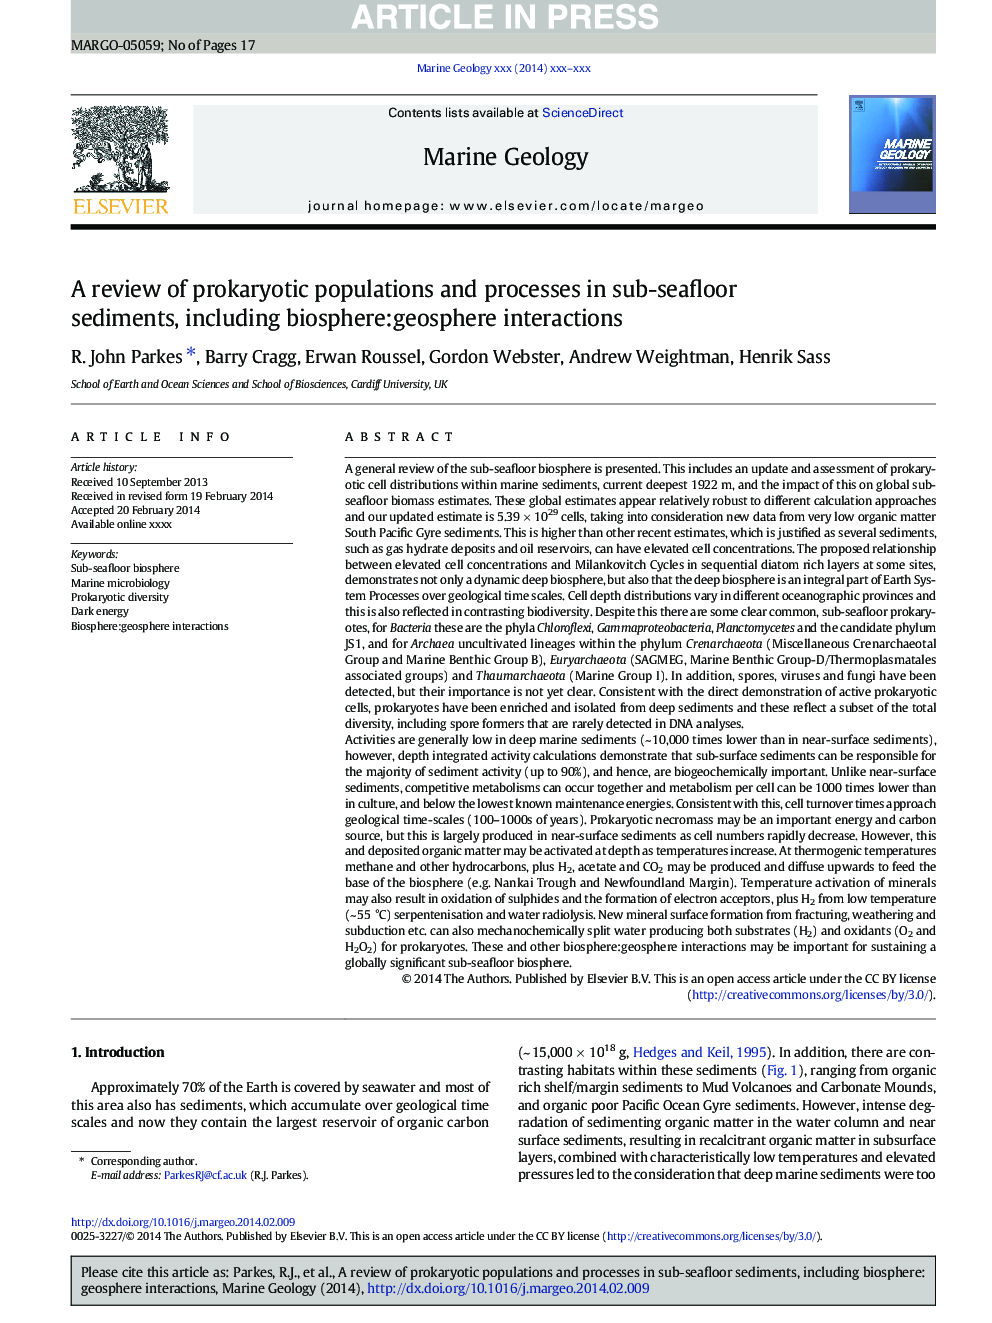 A review of prokaryotic populations and processes in sub-seafloor sediments, including biosphere:geosphere interactions